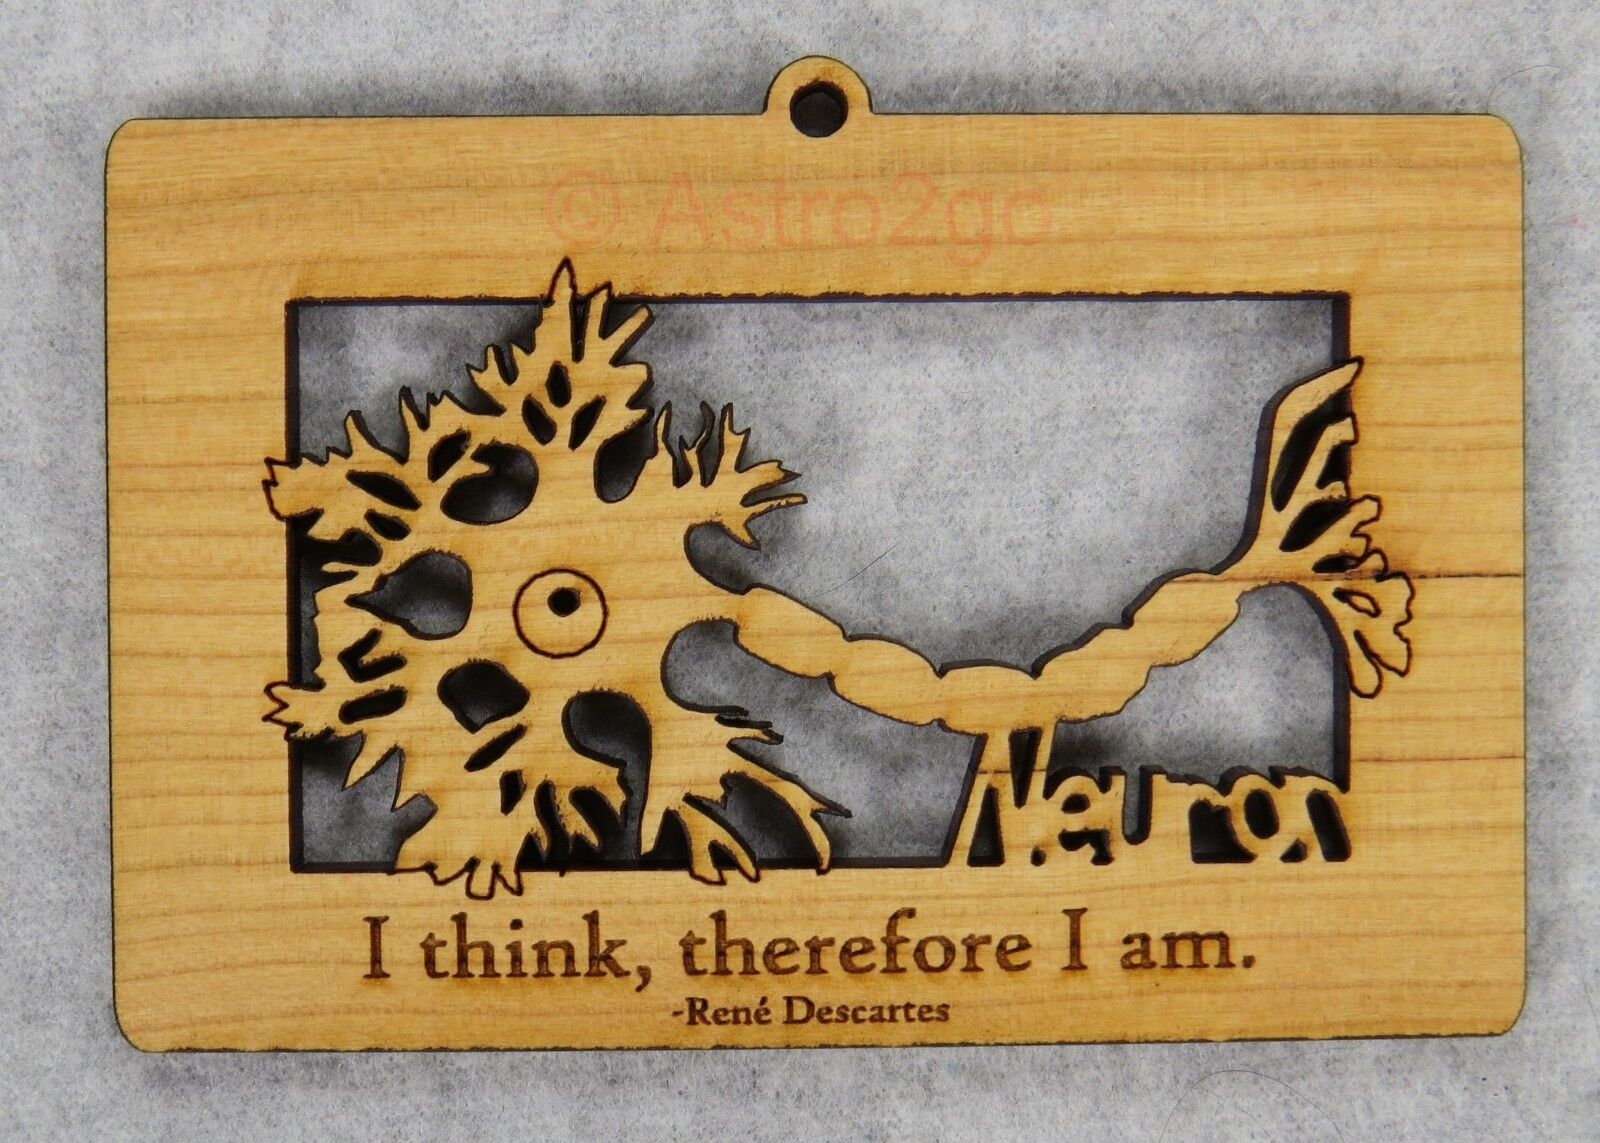 NEURON--Brain Cell Anatomy Synapse Biology Science Timber Green wooden ornament